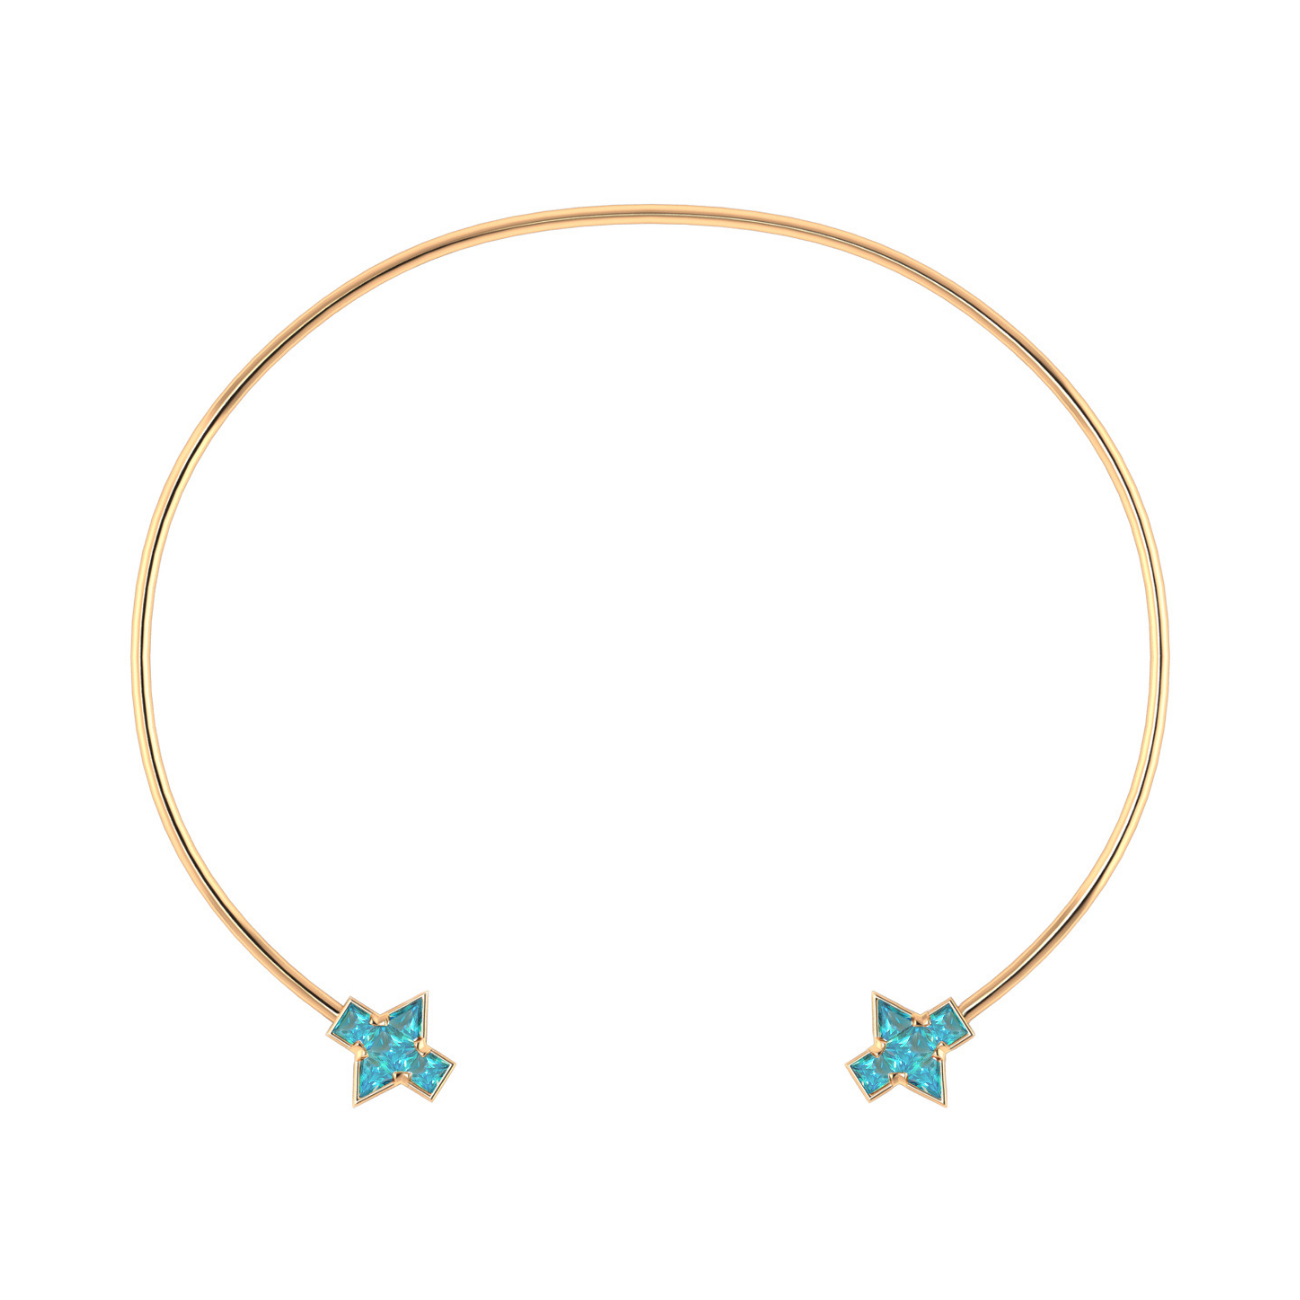 Star necklace, 18k gold